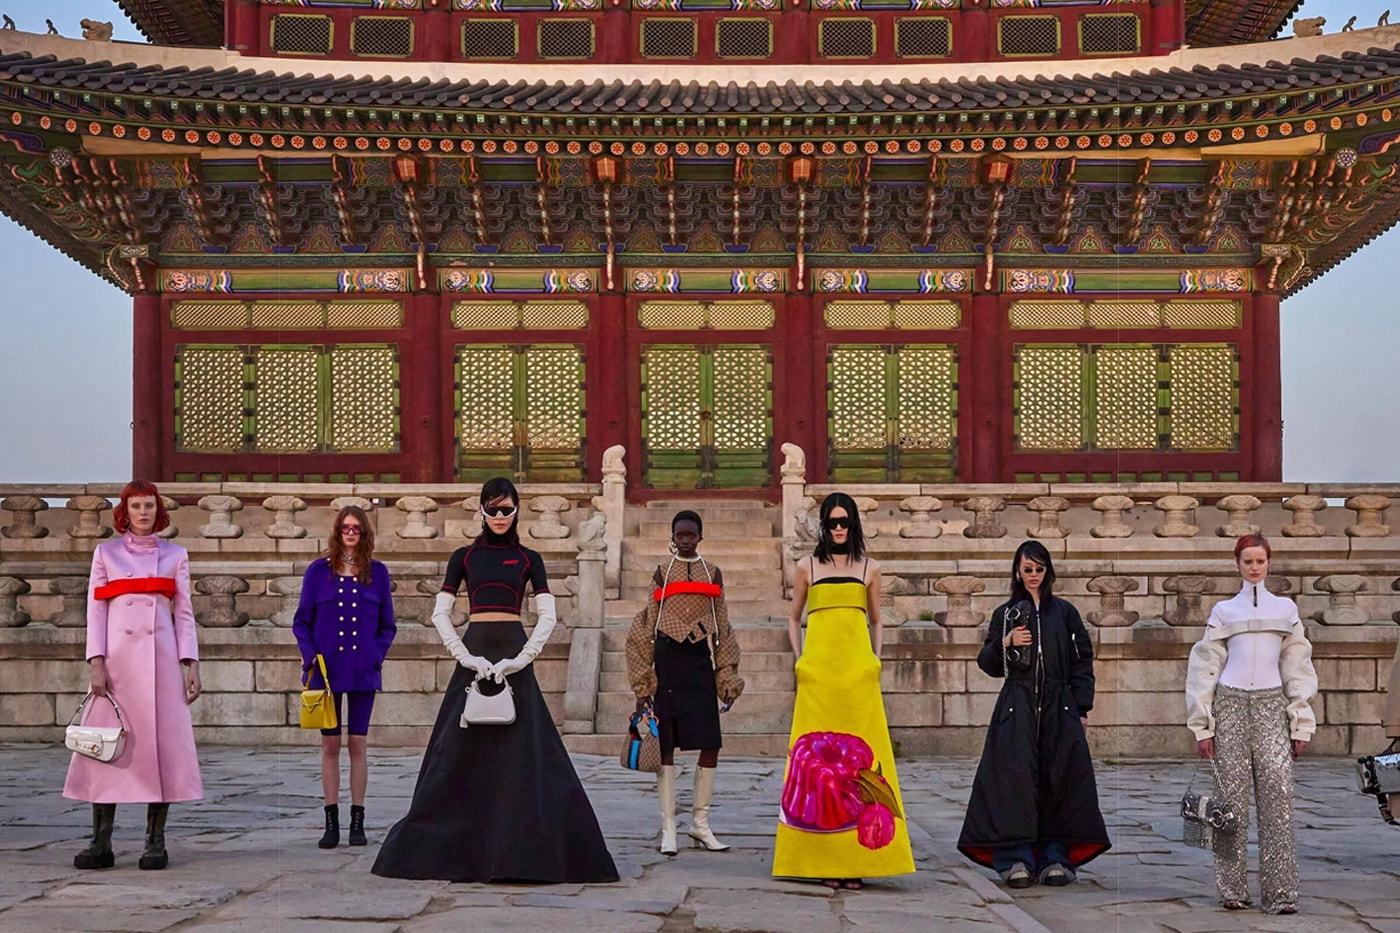 Luxury Fashion's Fascination With Korean Pop Culture